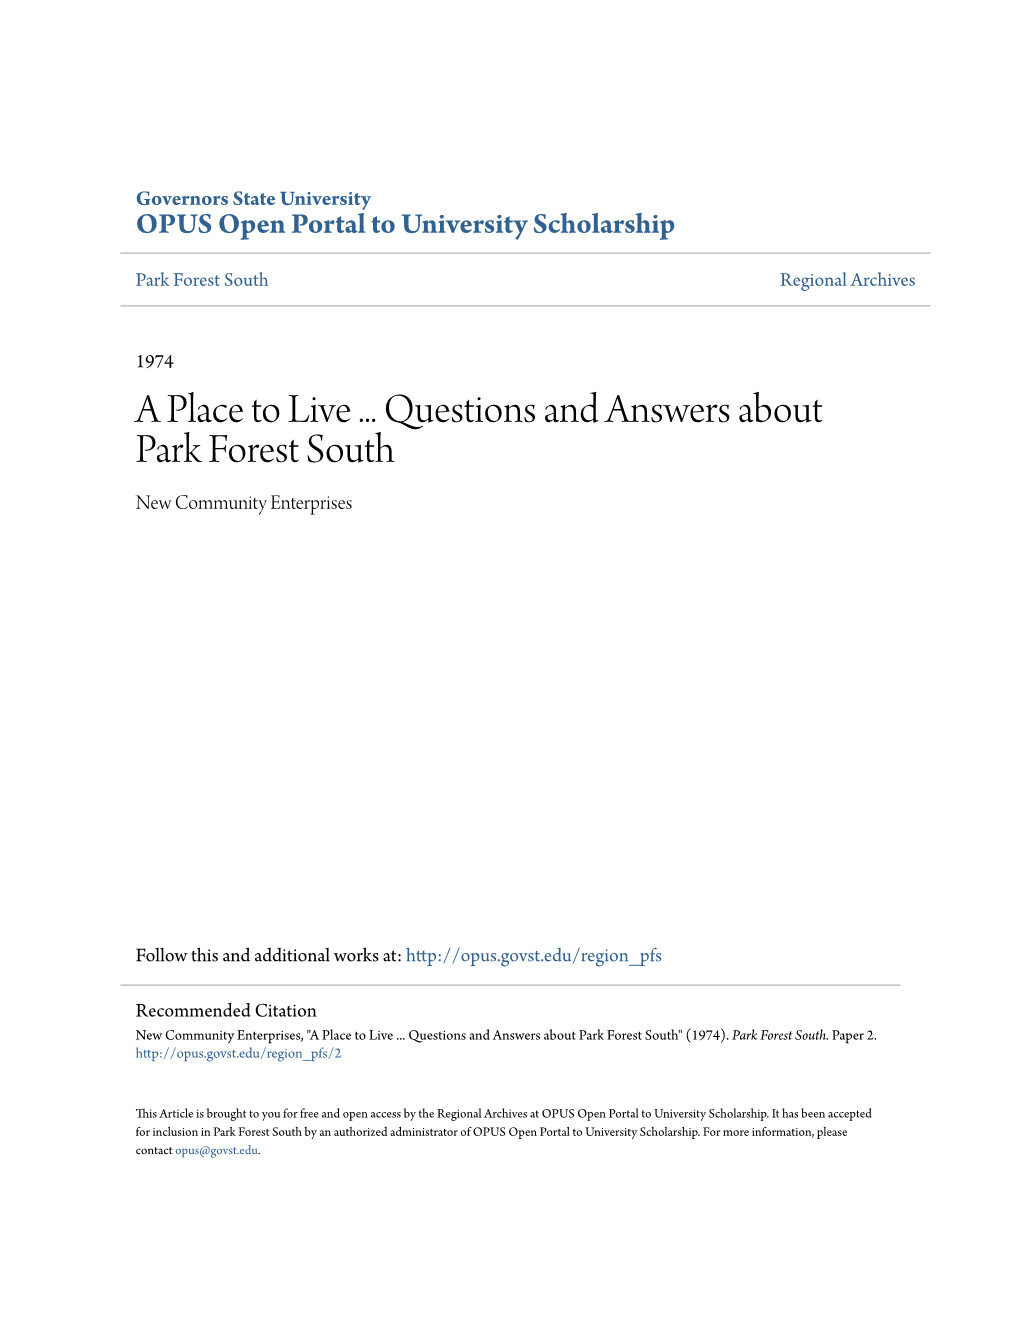 A Place to Live ... Questions and Answers About Park Forest South New Community Enterprises